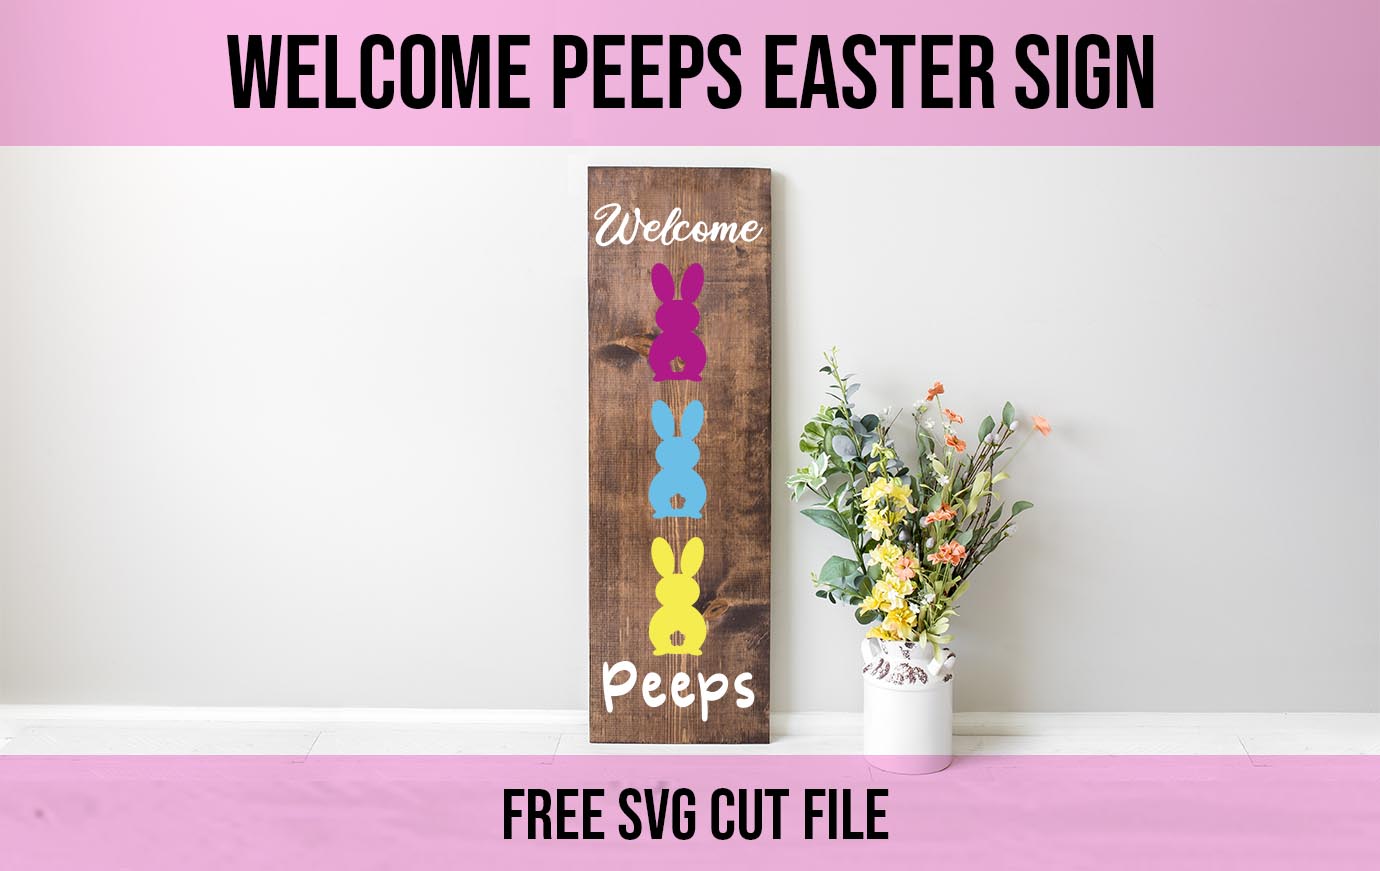 Welcome peeps free svg cut file